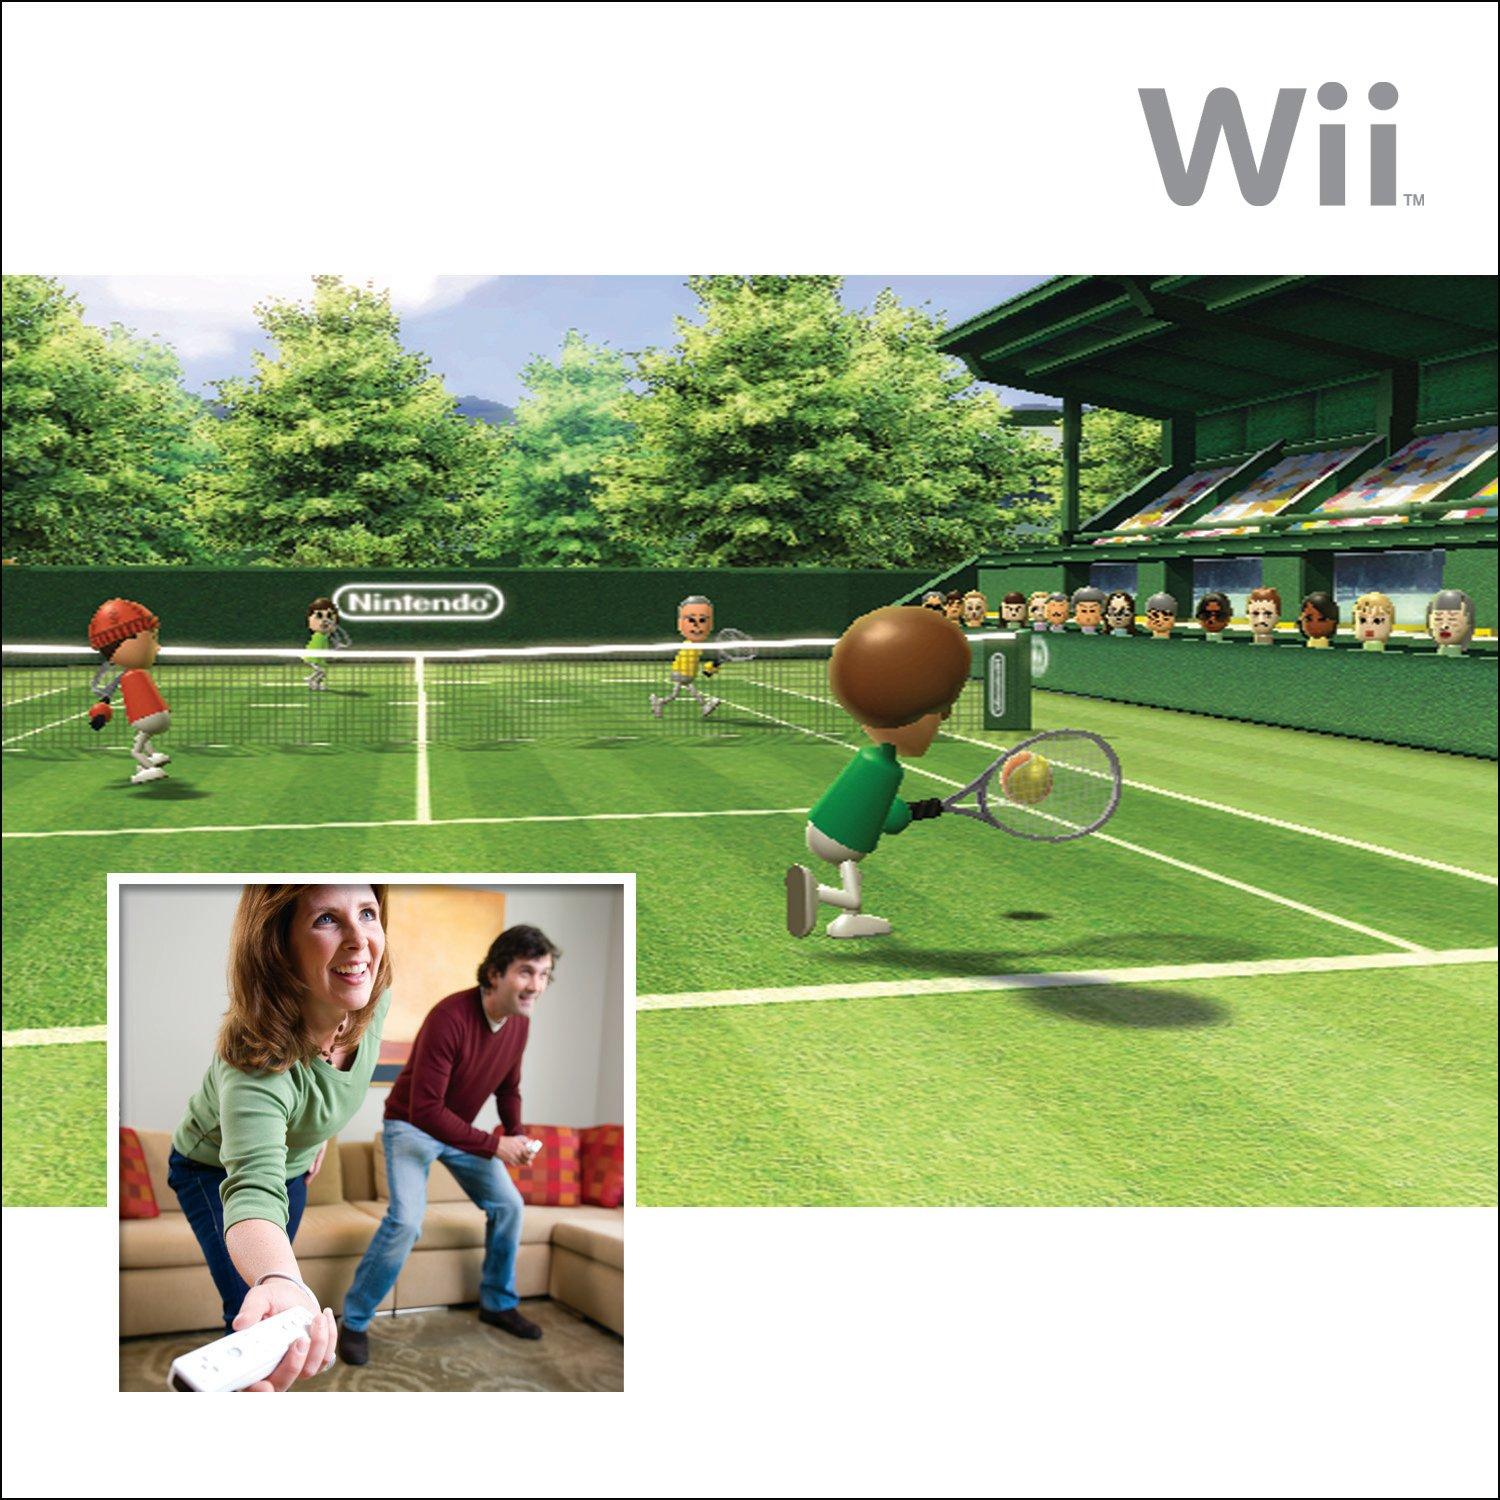 Nintendo Wii Console with Wii Sports Used 